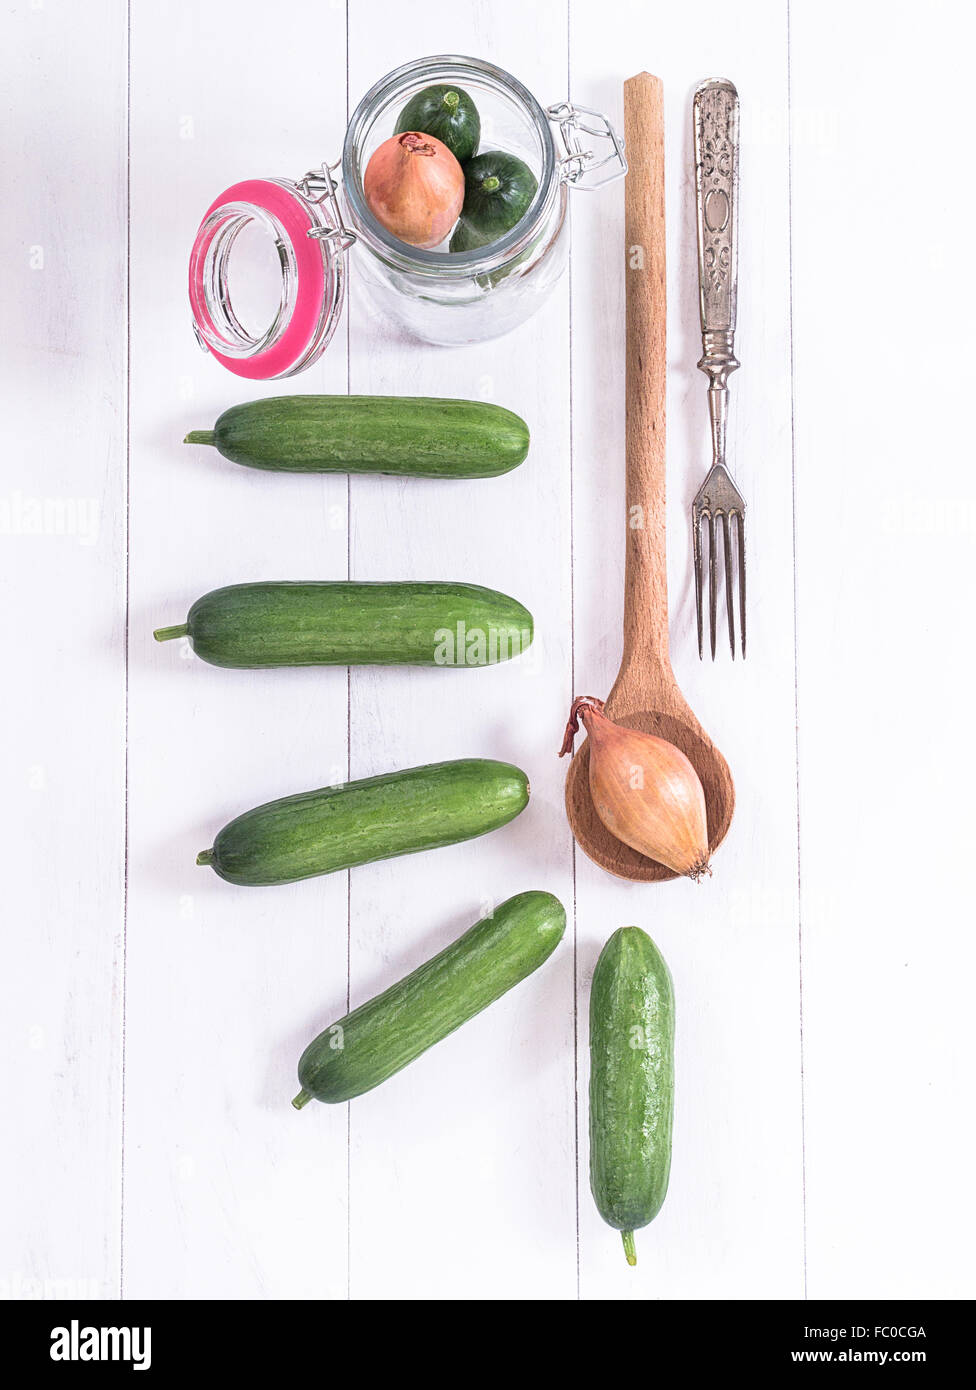 Cucumbers on a tray Stock Photo